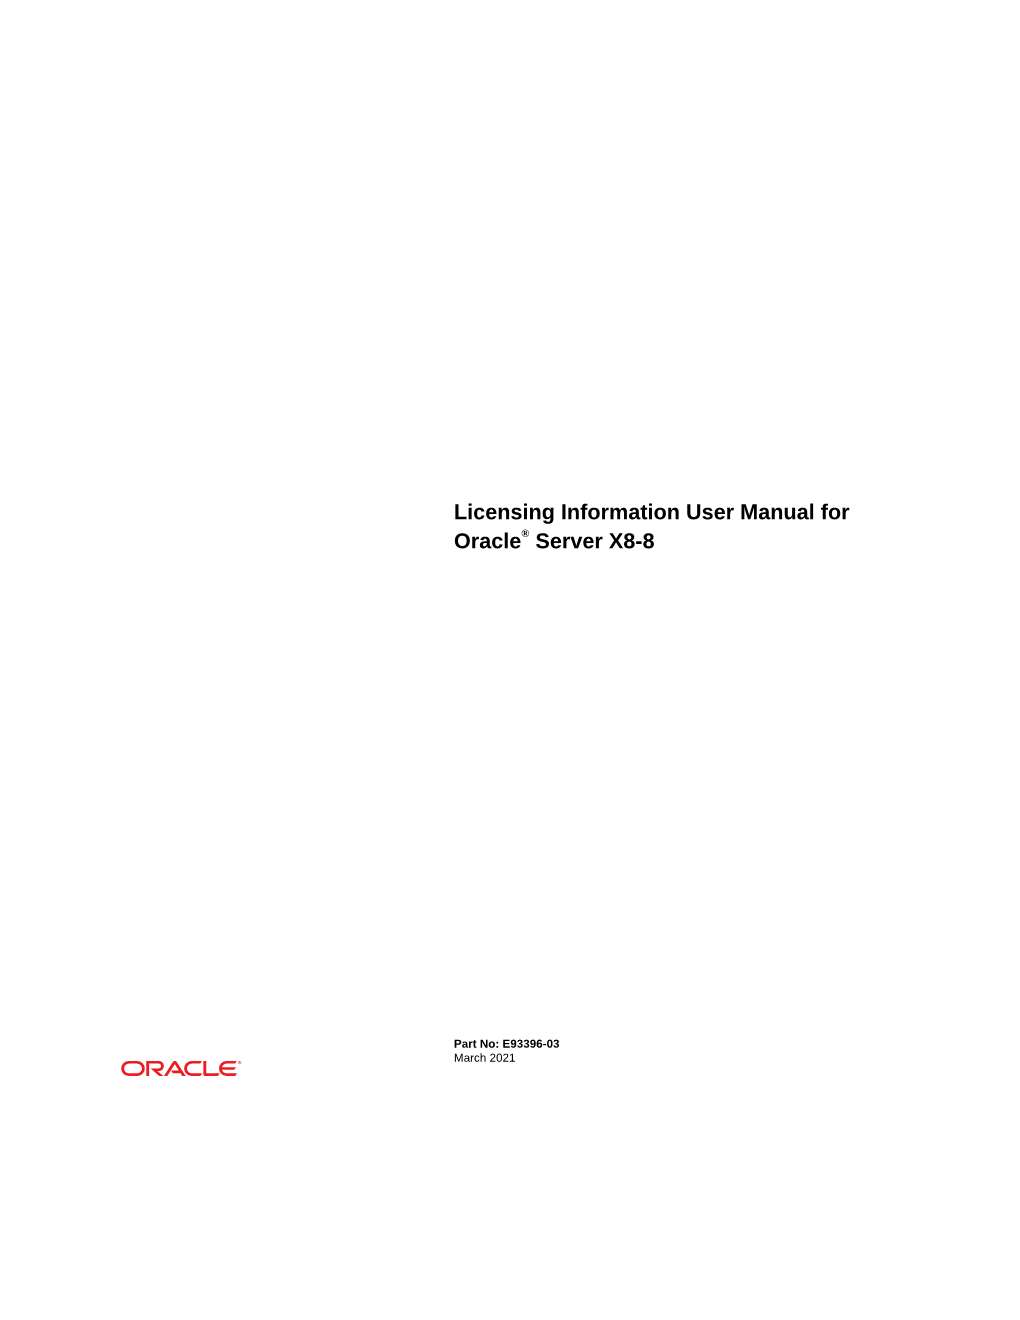 Licensing Information User Manual for Oracle® Server X8-8